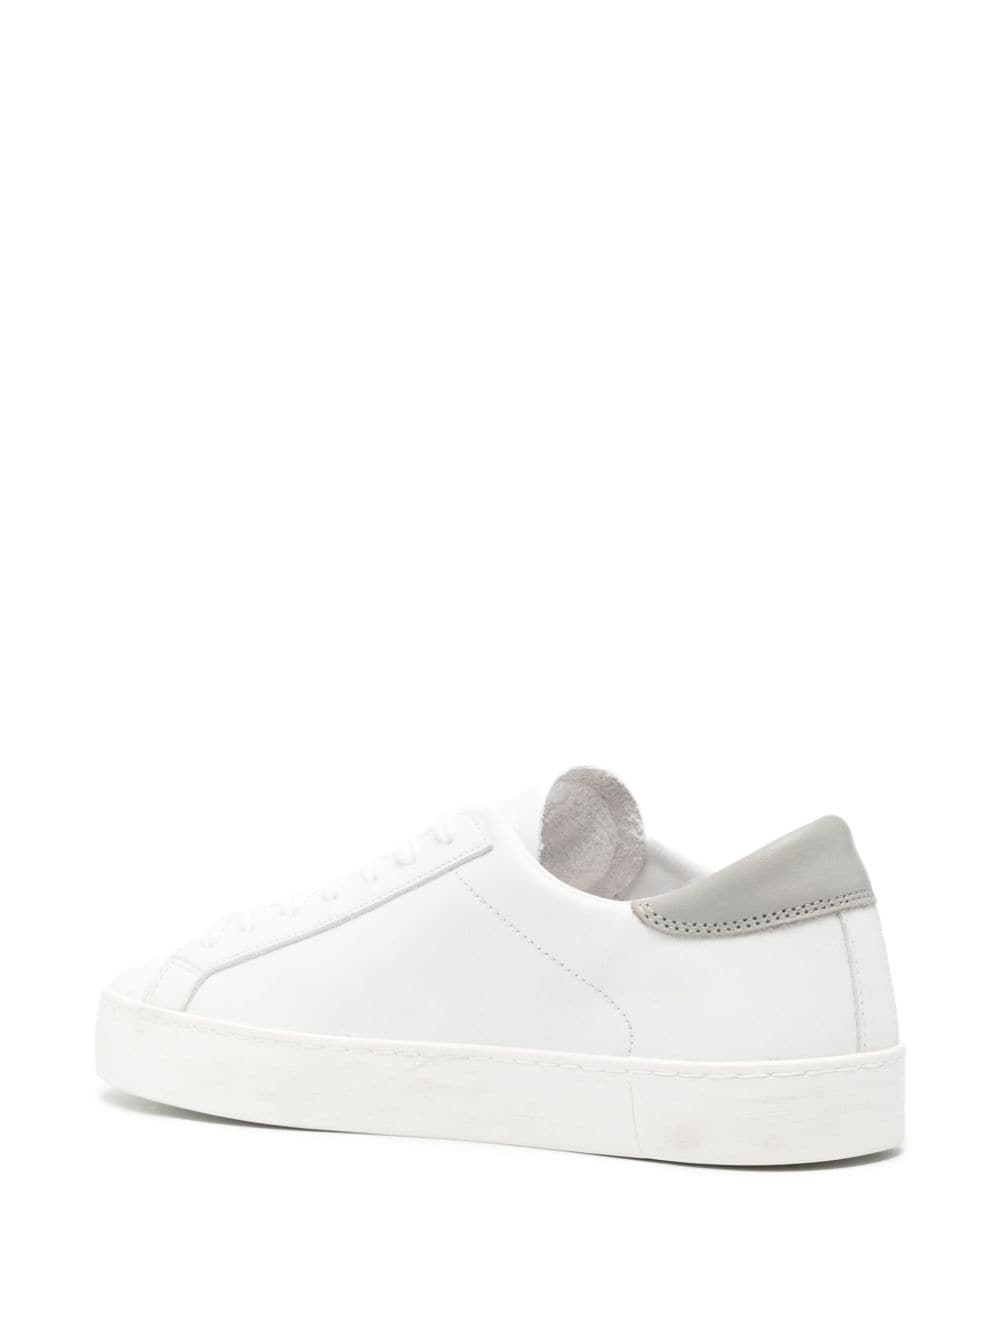 Shop Date Hill Leather Sneakers In White